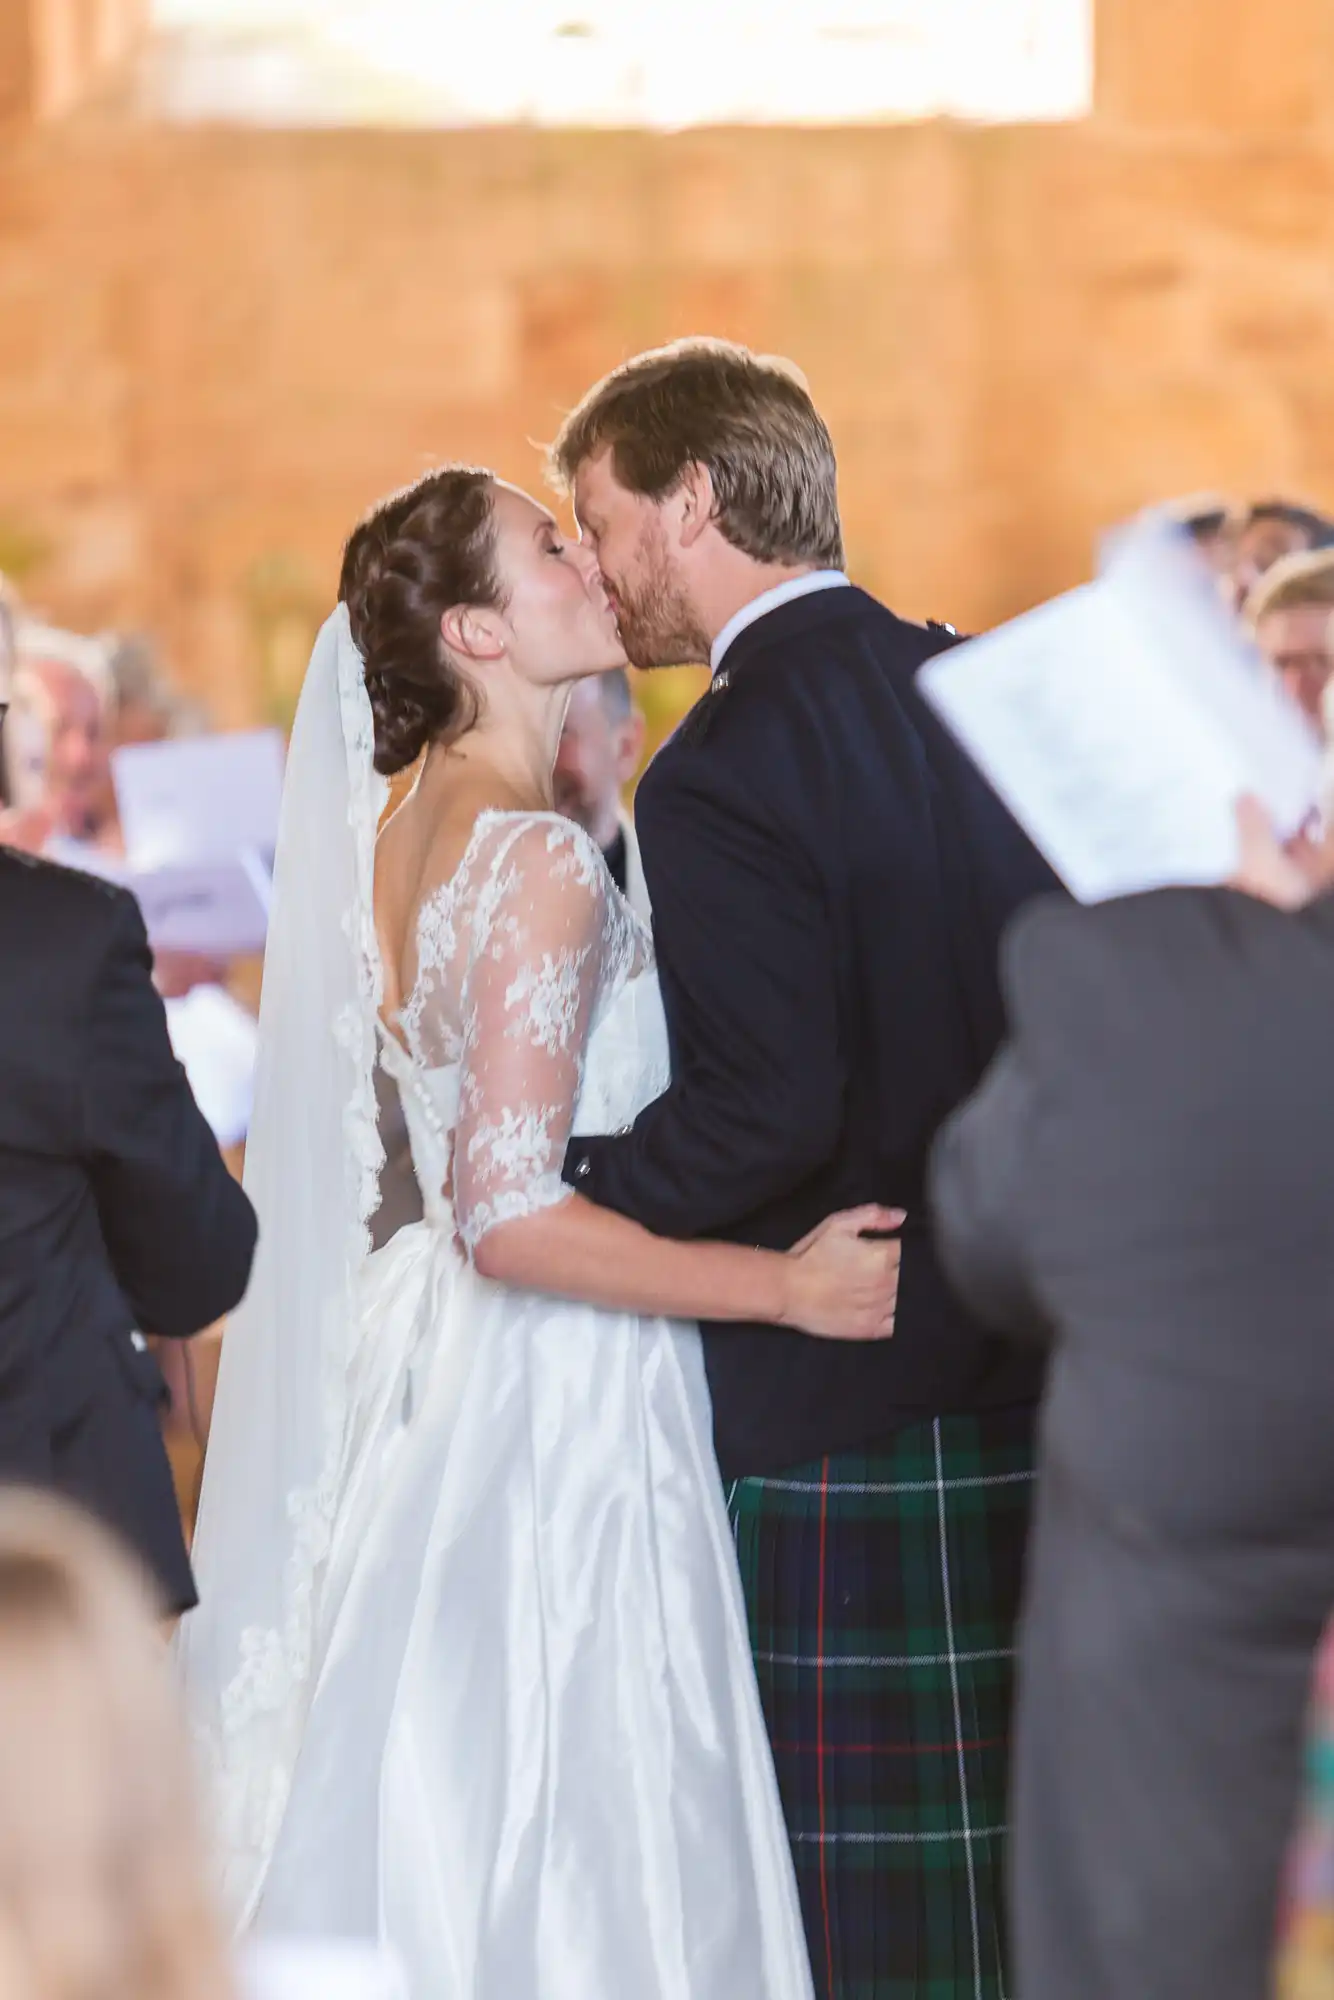 A bride in a lace gown and a groom in a kilt kiss surrounded by guests at a wedding ceremony.